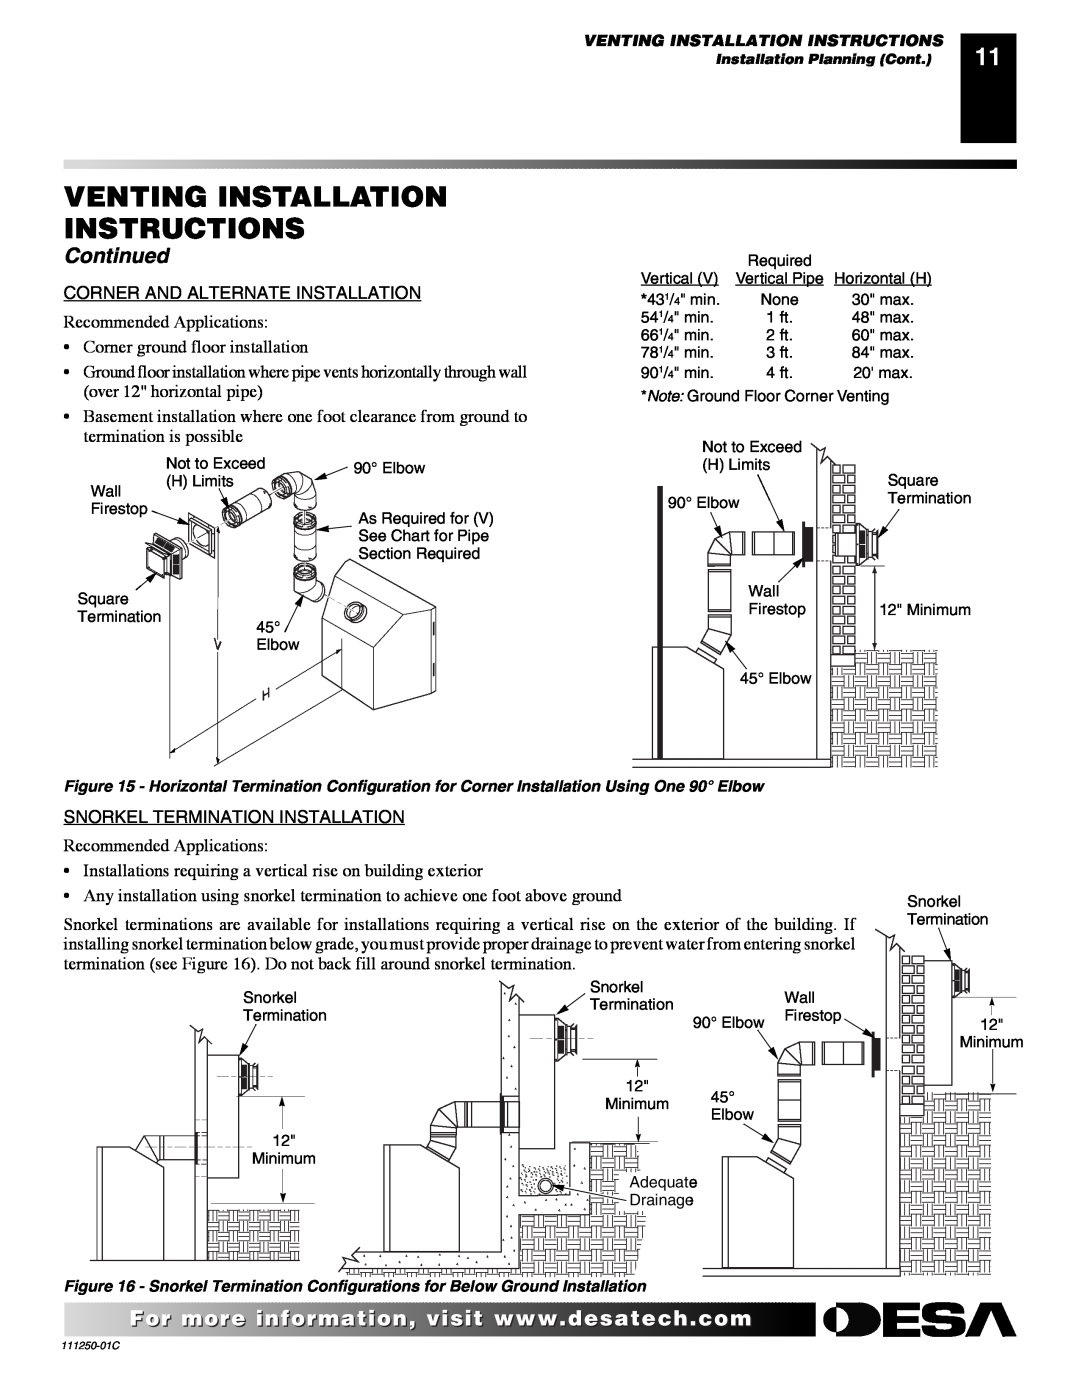 Desa (V)T36NA SERIES installation manual Venting Installation Instructions, Continued, Recommended Applications 